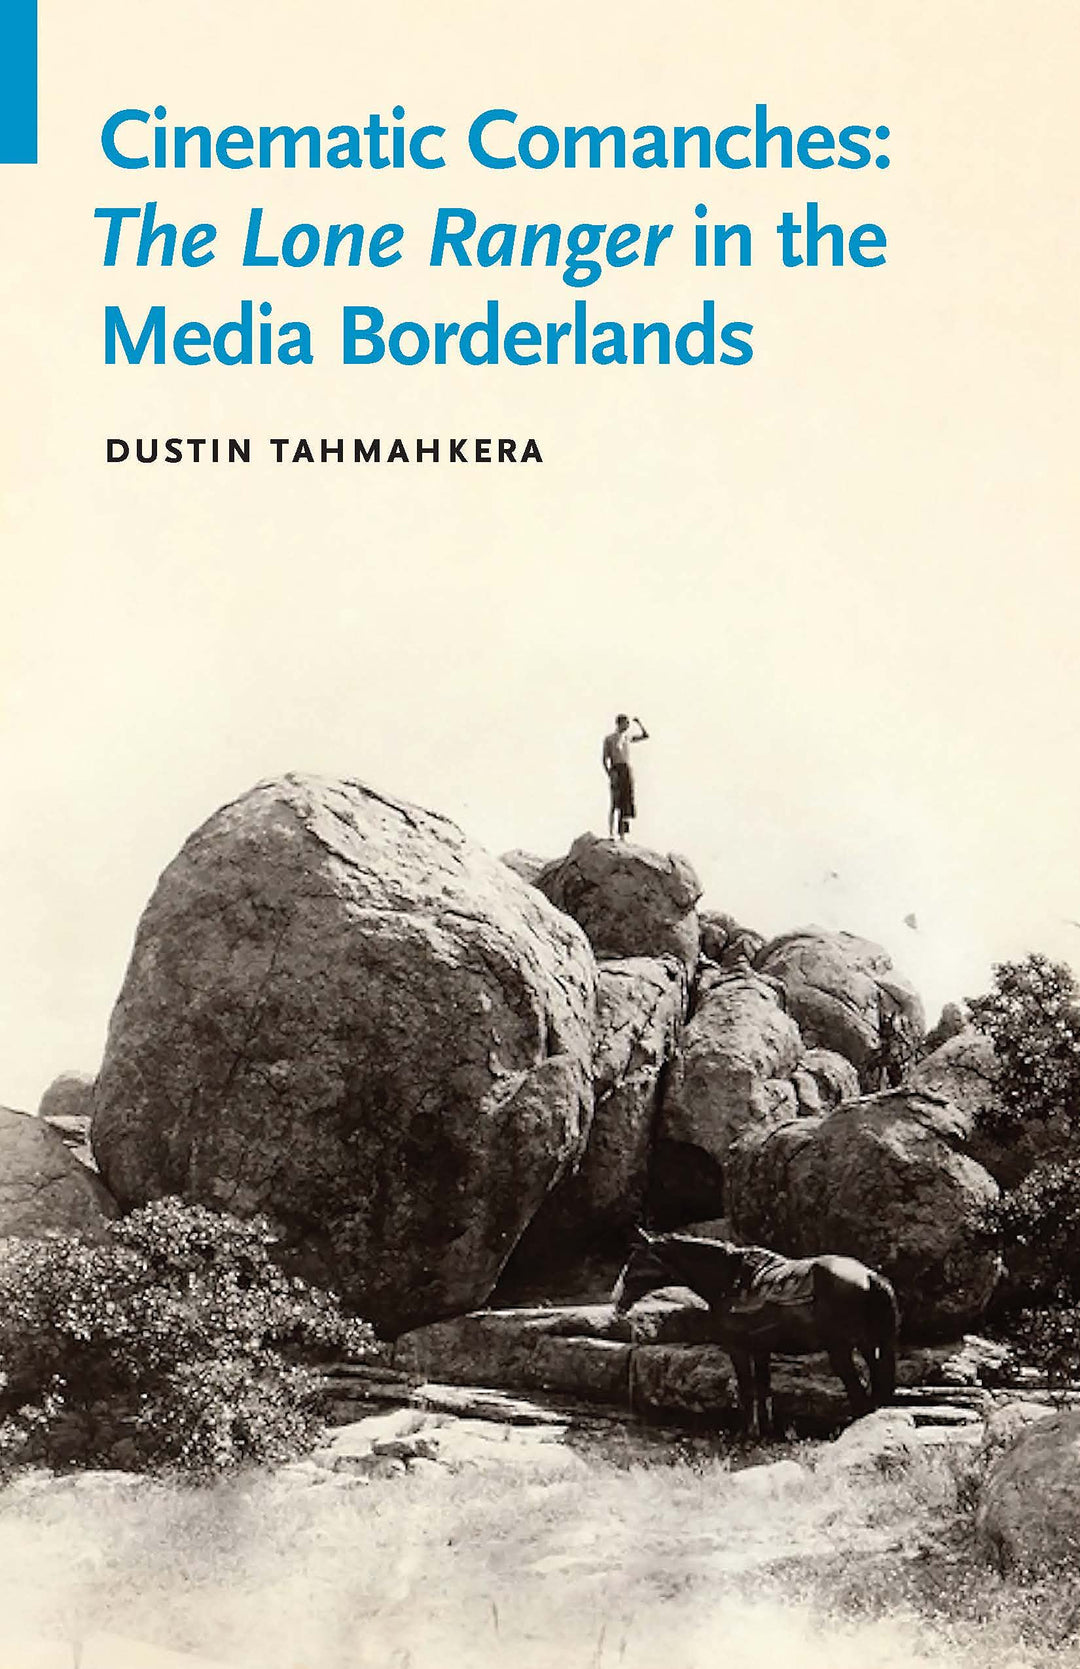 Cinematic Comanches: The Lone Ranger in the Media Borderlands by Dustin Tahmahkera